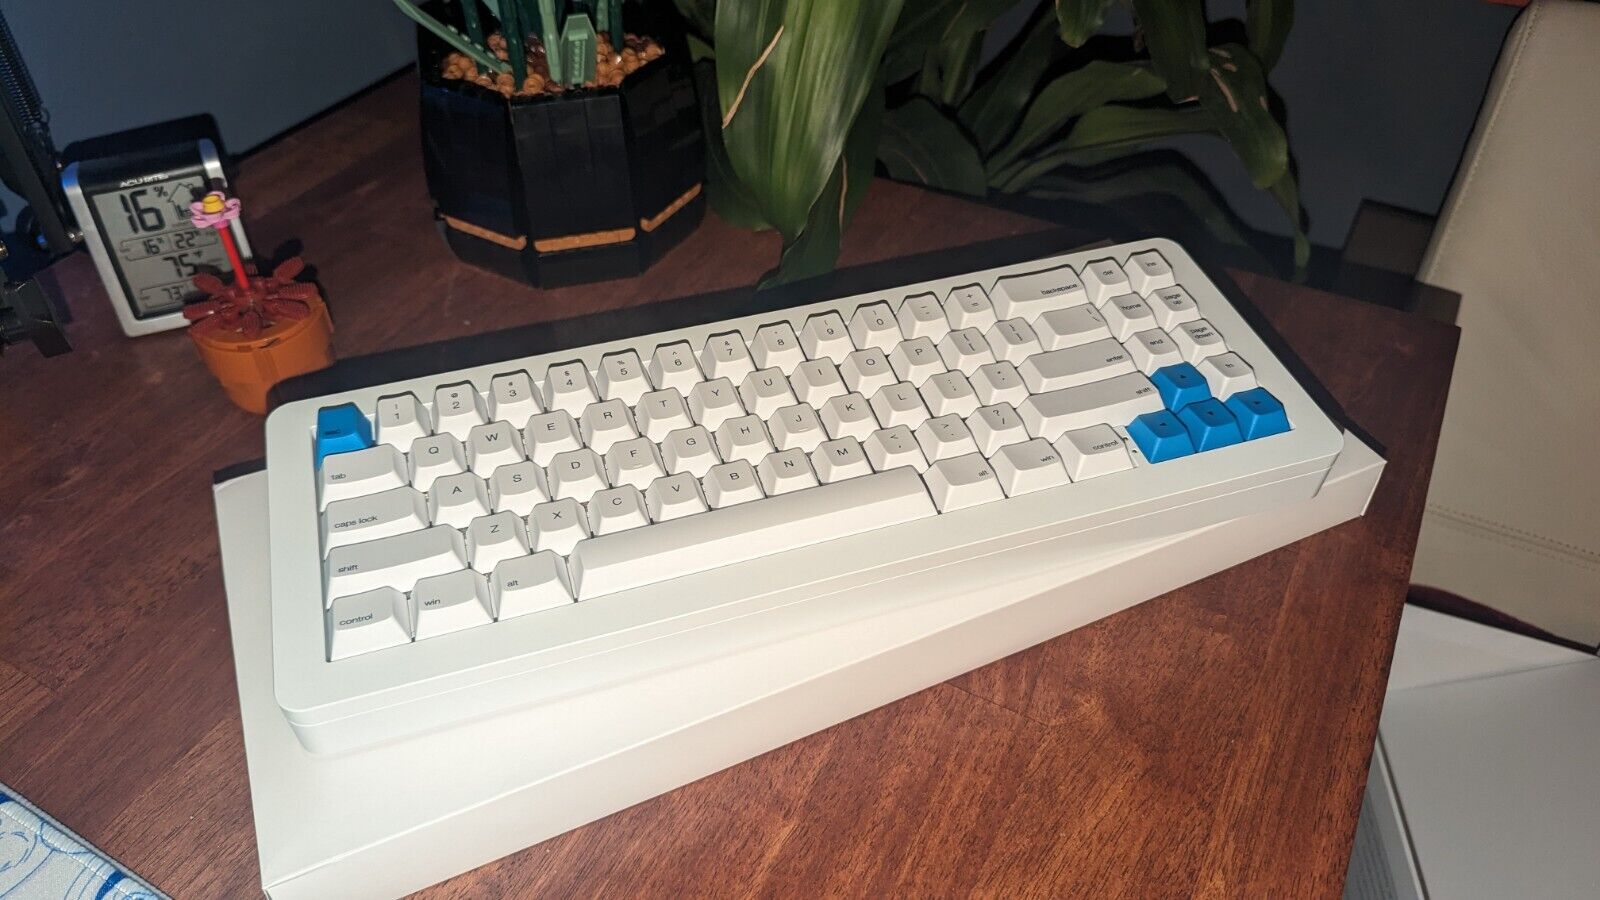 Alpaca WhiteFox Eclipse Mechanical Keyboard with Aluminum High Profile Case